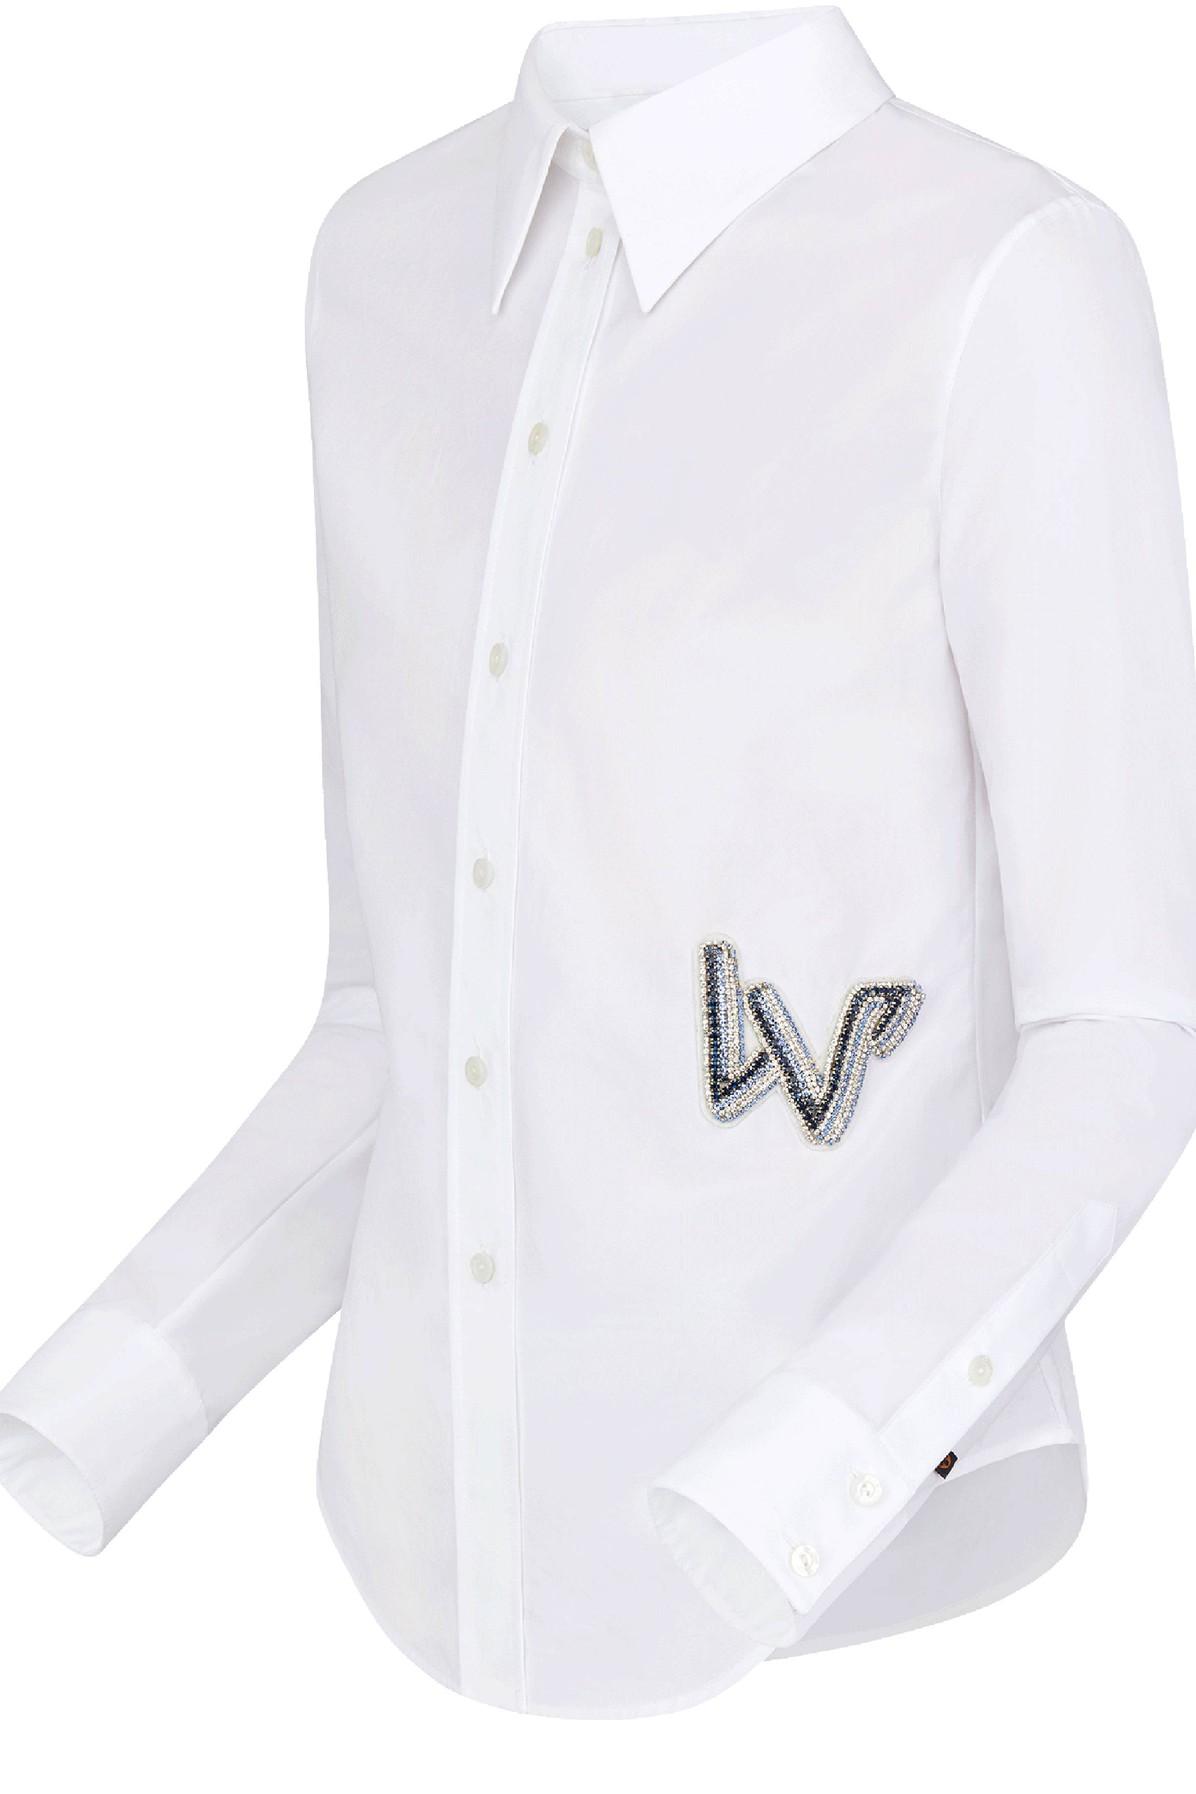 Buy Louis Vuitton Lion Embroidered Circle Logo Embroidered Button Down Long  Sleeve Shirt White HBS04WAZV M White from Japan - Buy authentic Plus  exclusive items from Japan